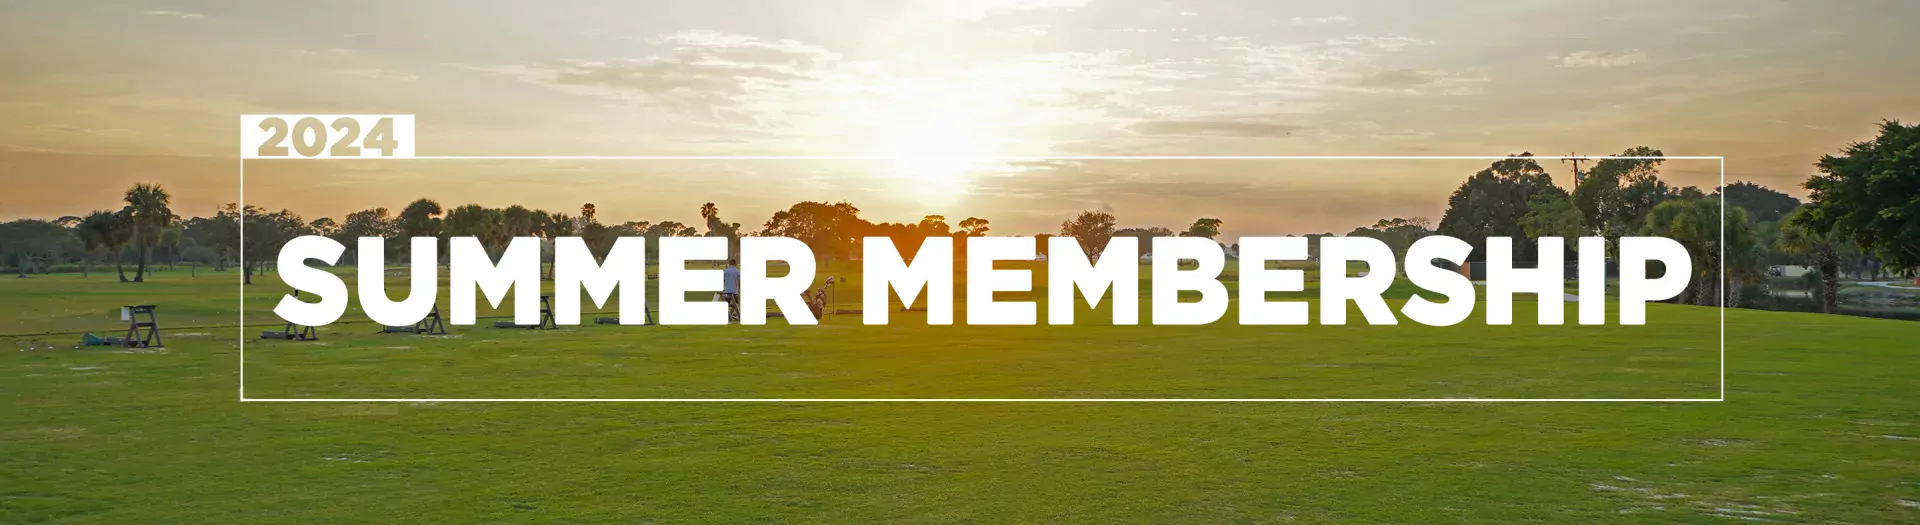 2024 Summer Membership with golf course sunset photo as background